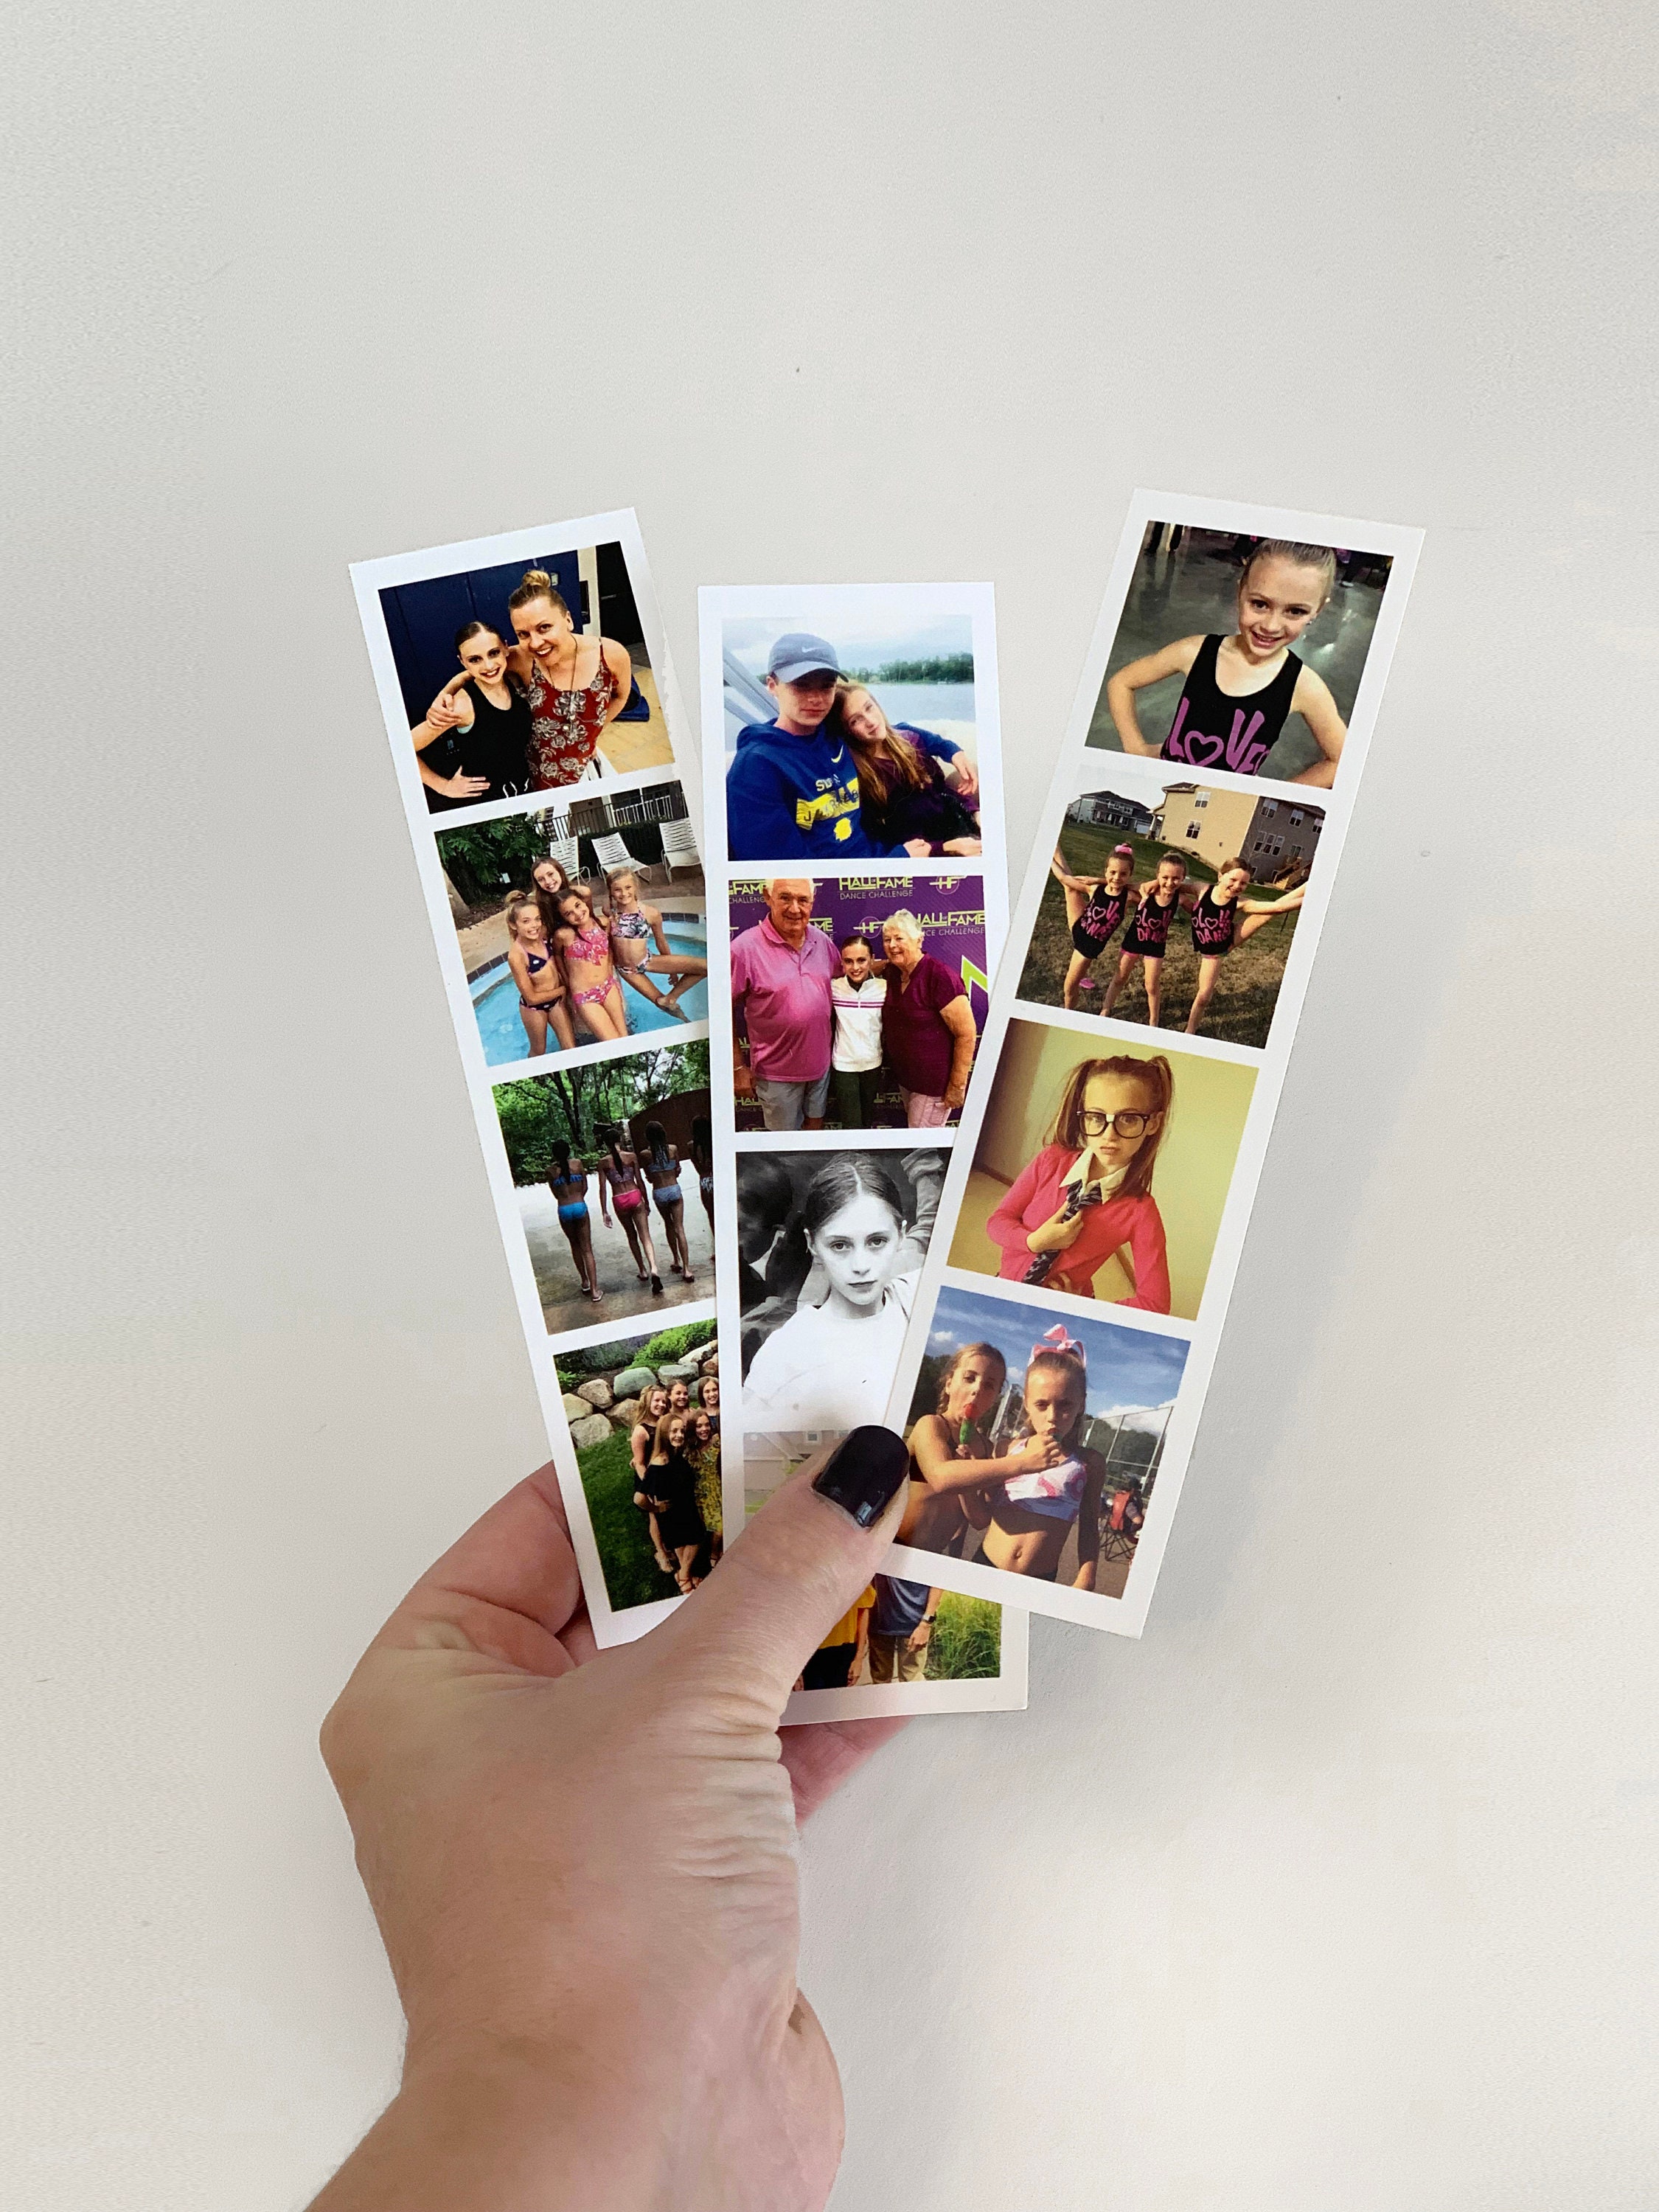 Glossy cardstock photo prints - many sizes, low pricing!